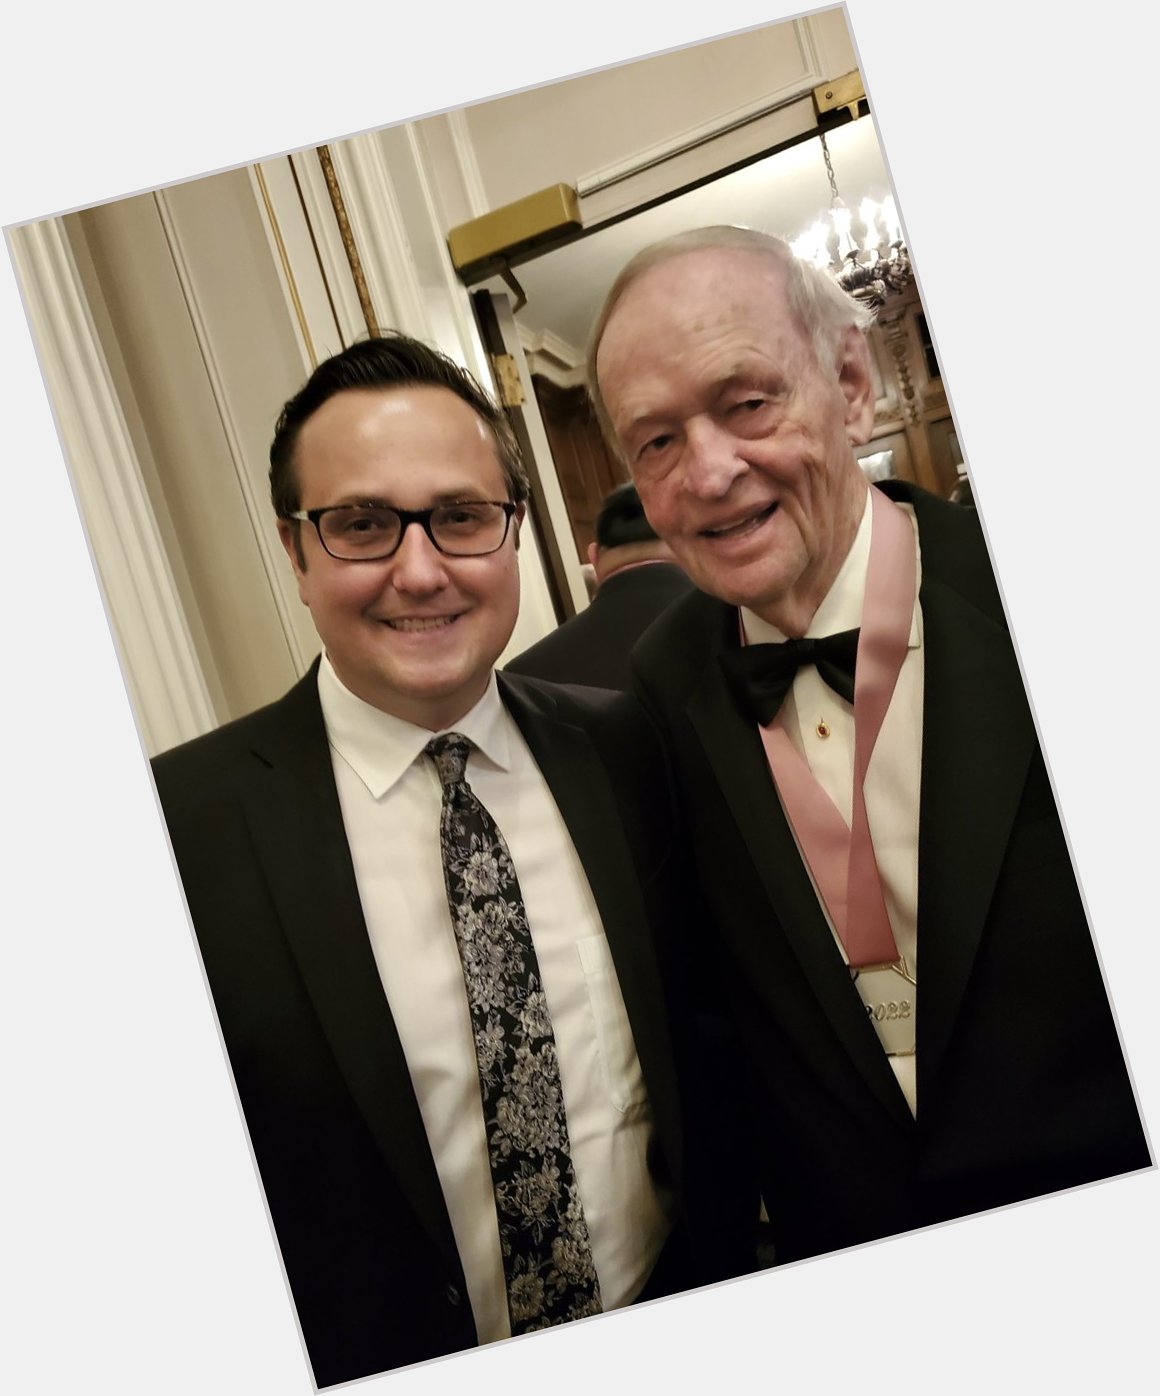 Wishing a very Happy Birthday to Prime Minister Jean Chrétien! 